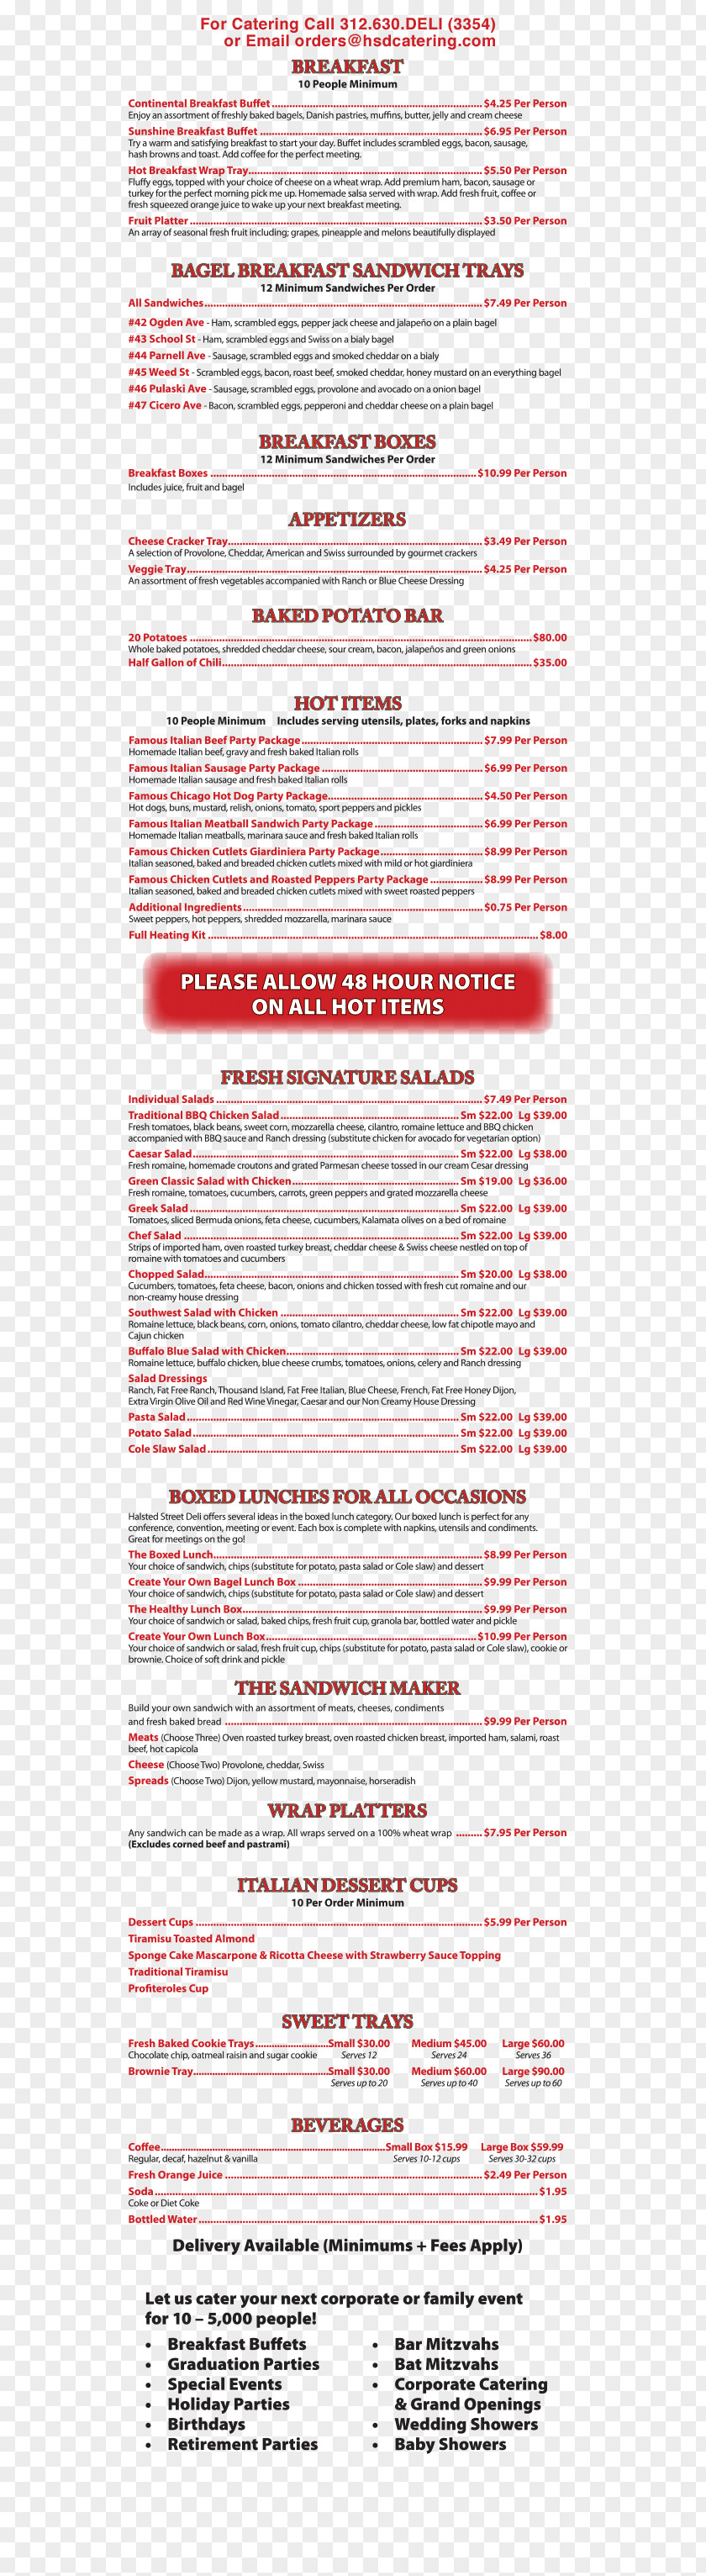 Catering Menu Document Line PNG